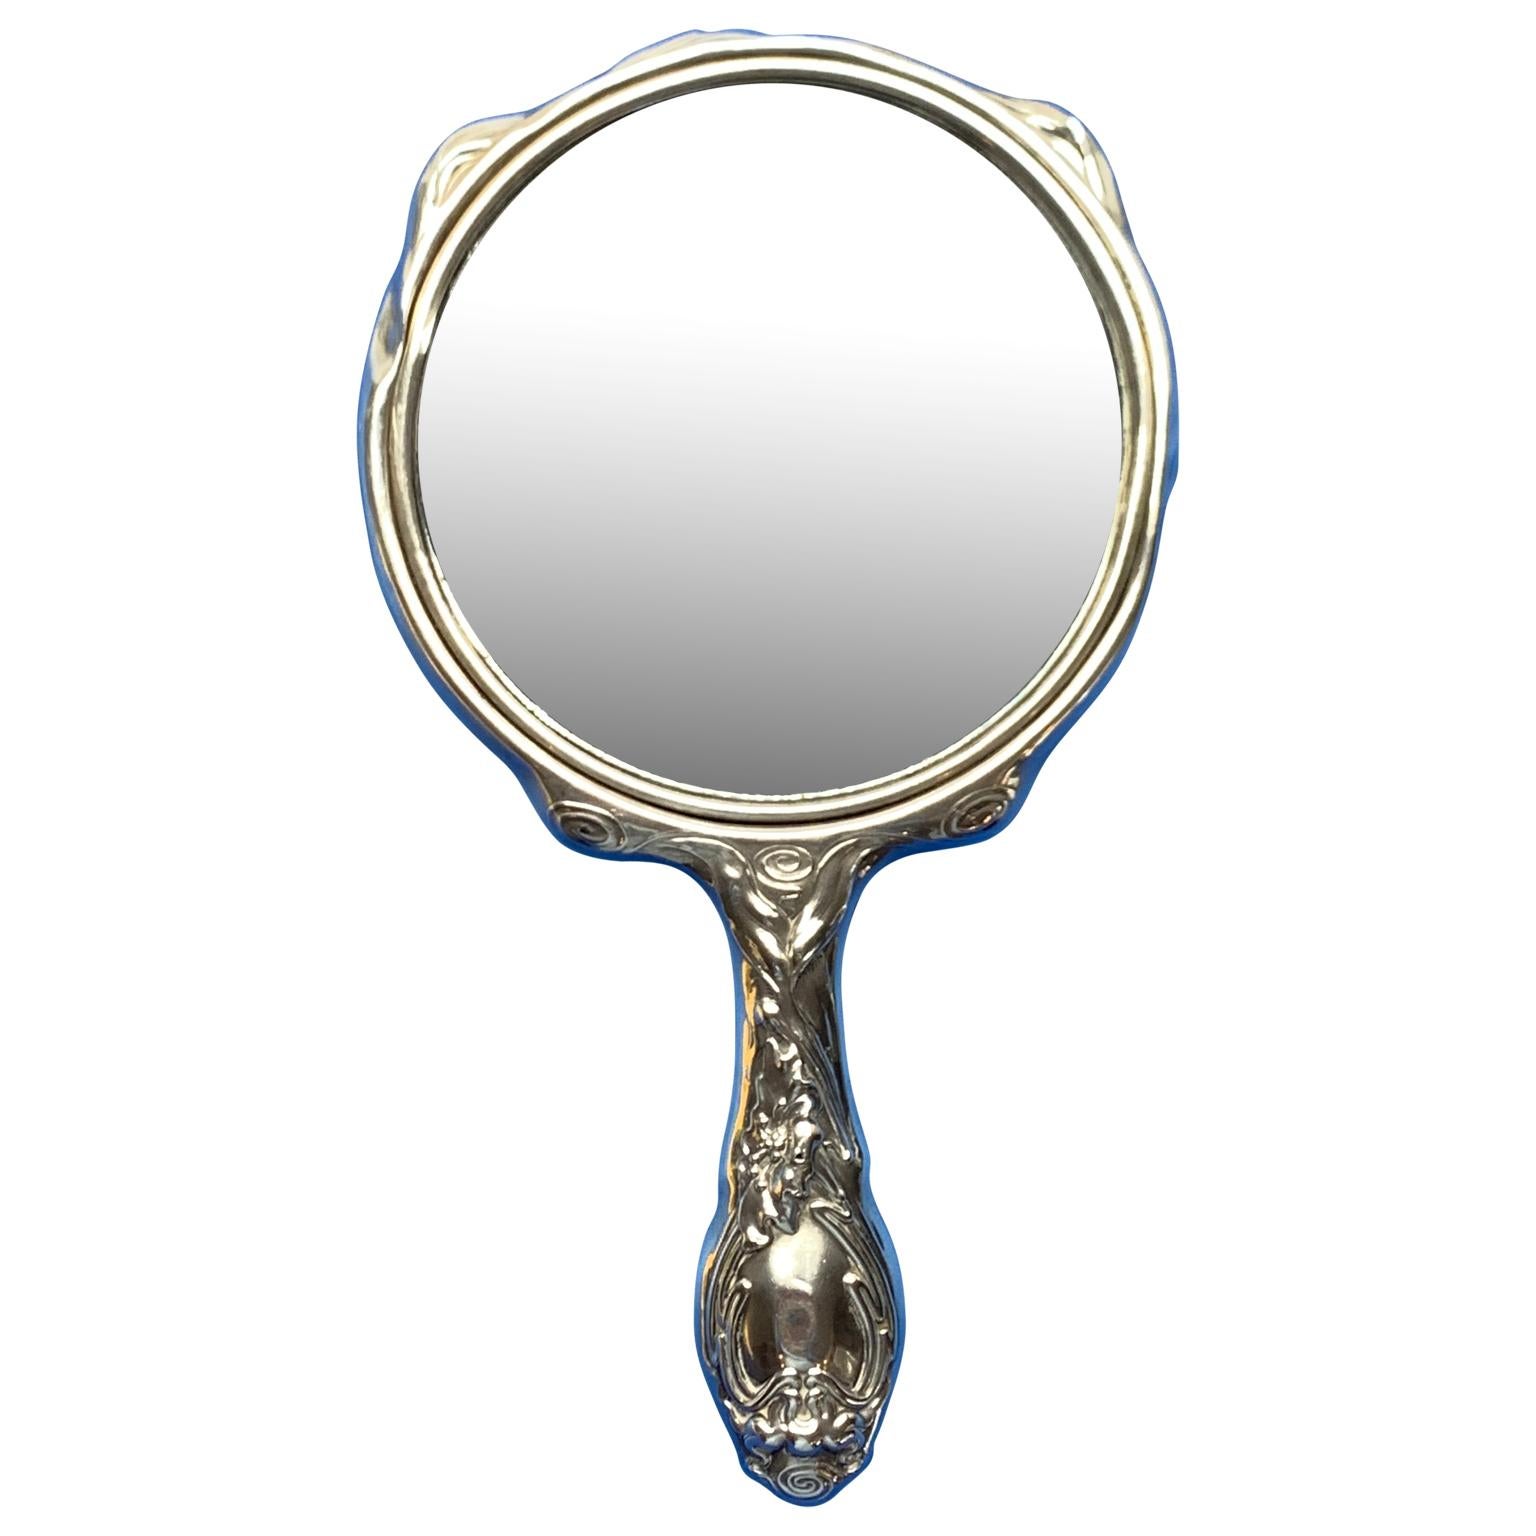 French sterling silver Art Nouveau hand vanity mirror

Mirror has beveled mirror-glass and marked for sterling silver.